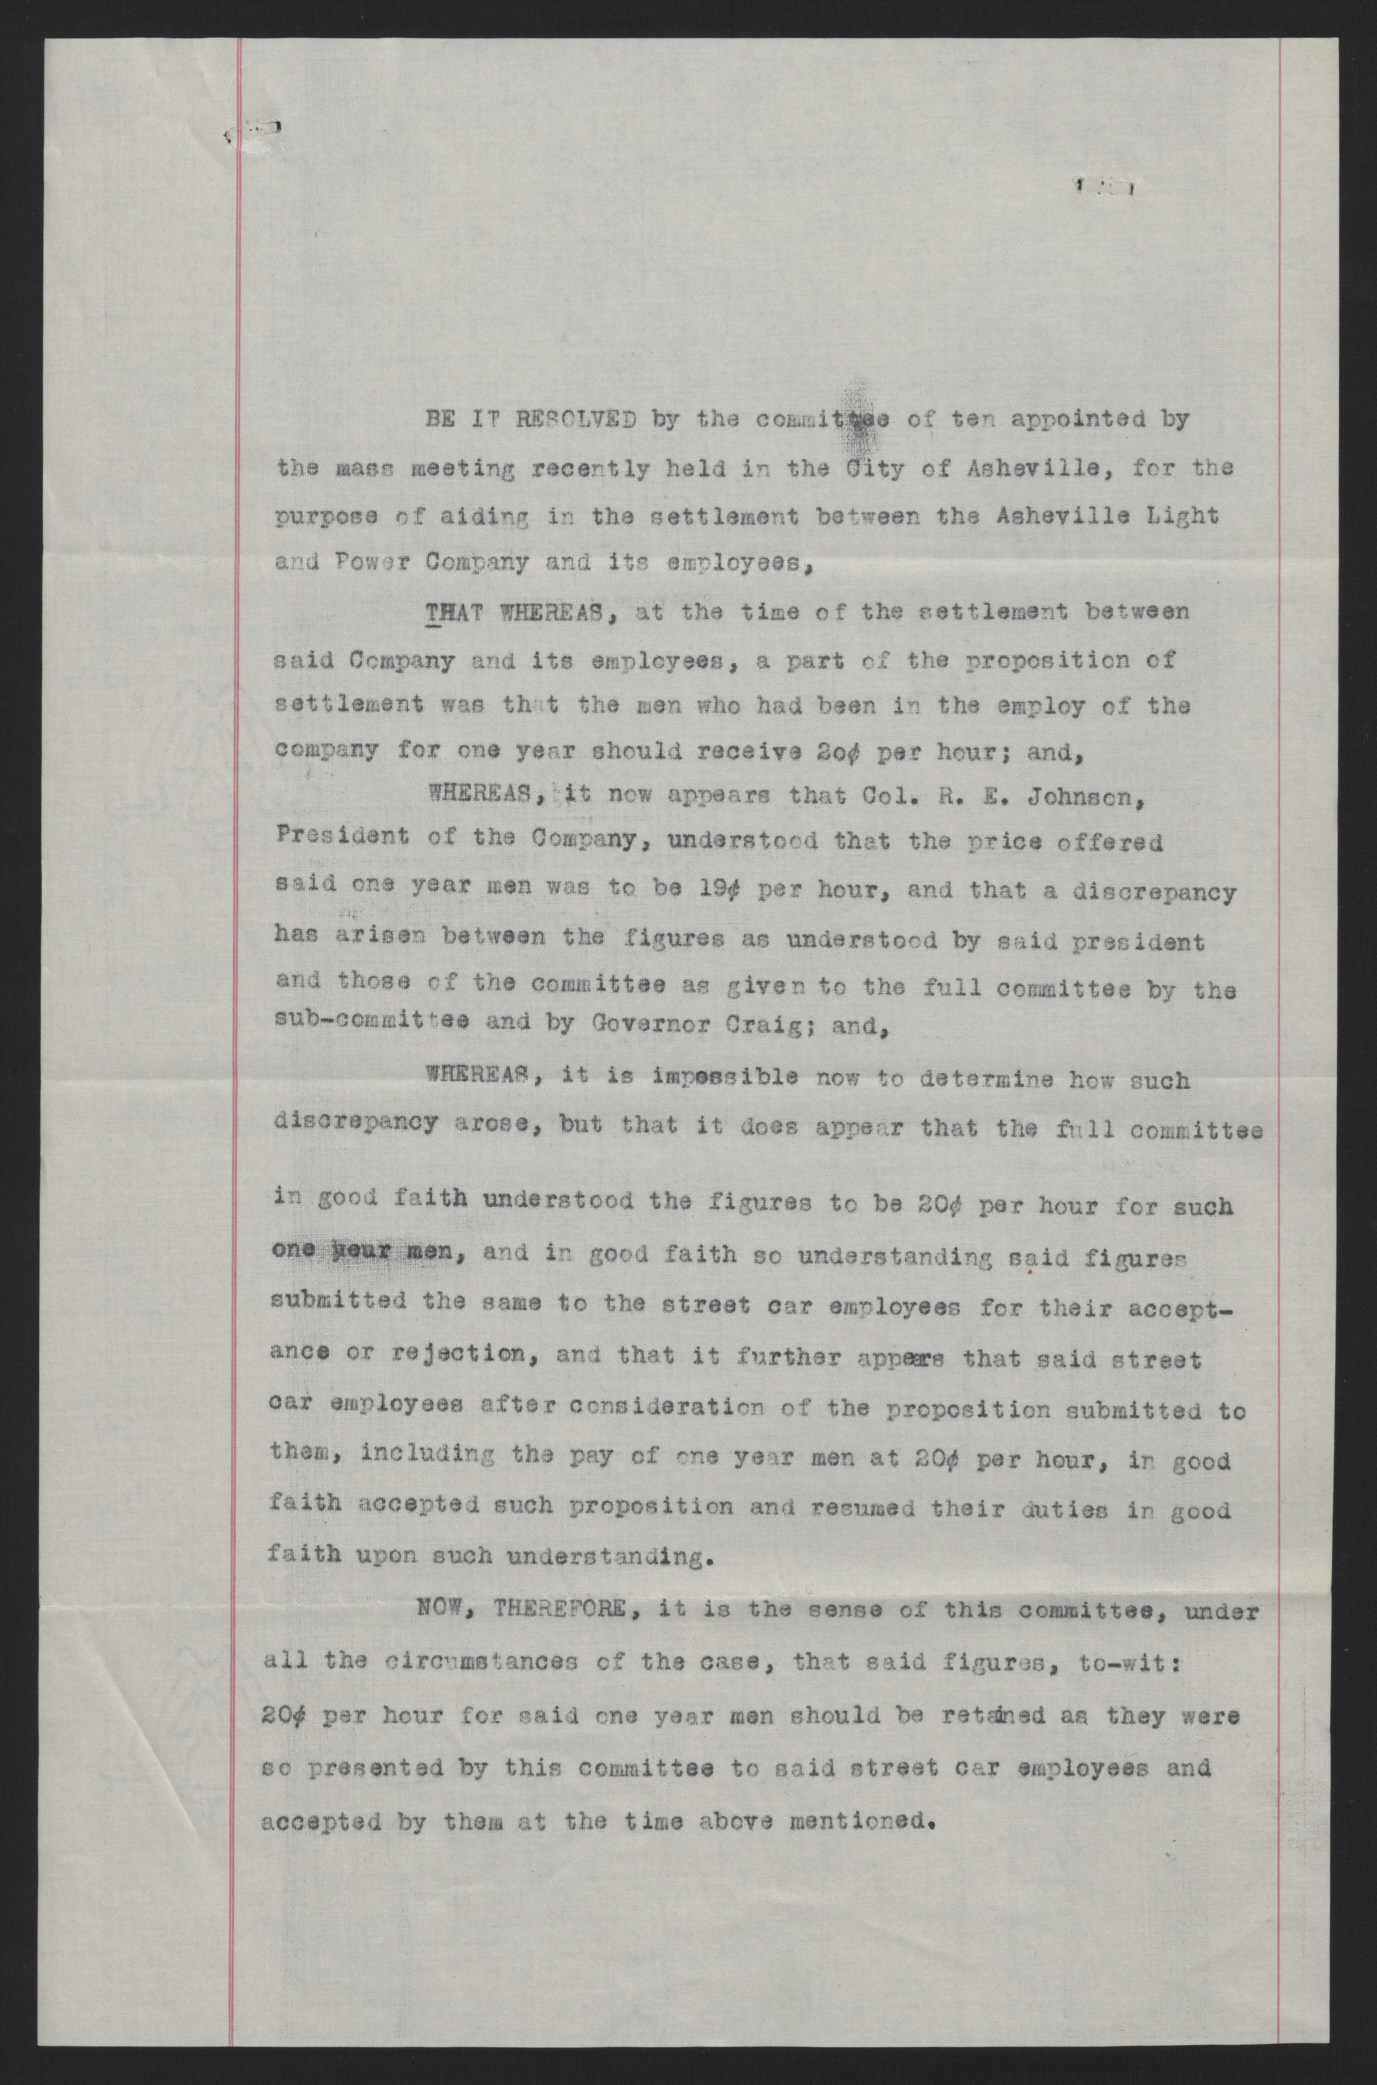 Resolution by an Arbitration Committee in an Asheville Labor Dispute, May 1913, page 1